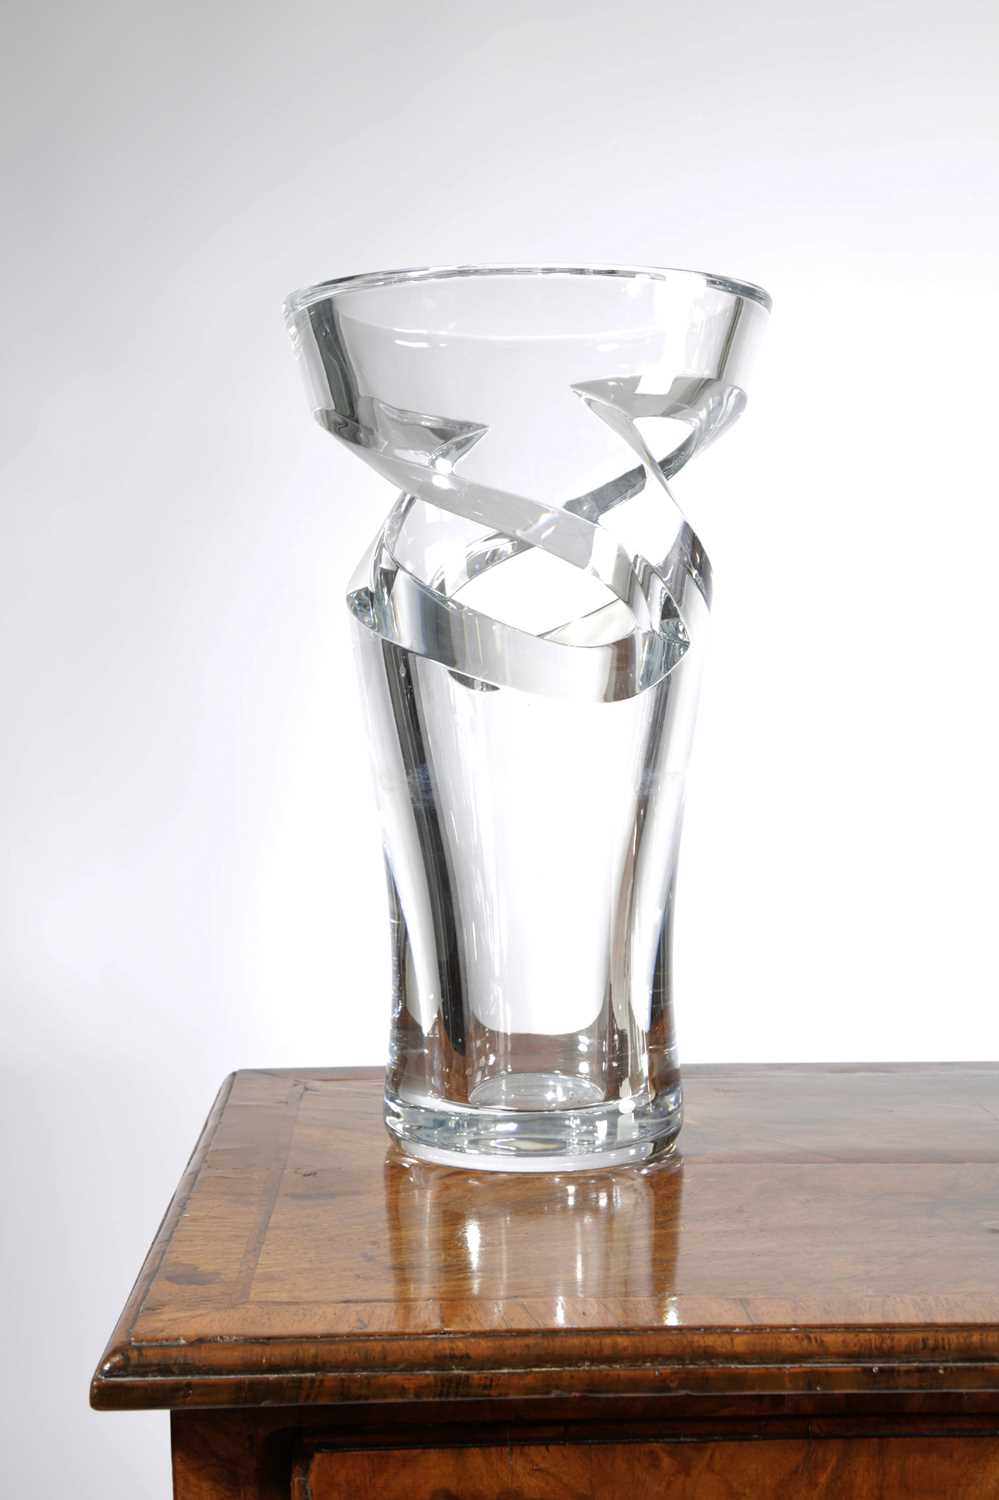 A BACCARAT GLASS TORNADO VASE 20TH CENTURY of flaring cylindrical form with cut-out twisting